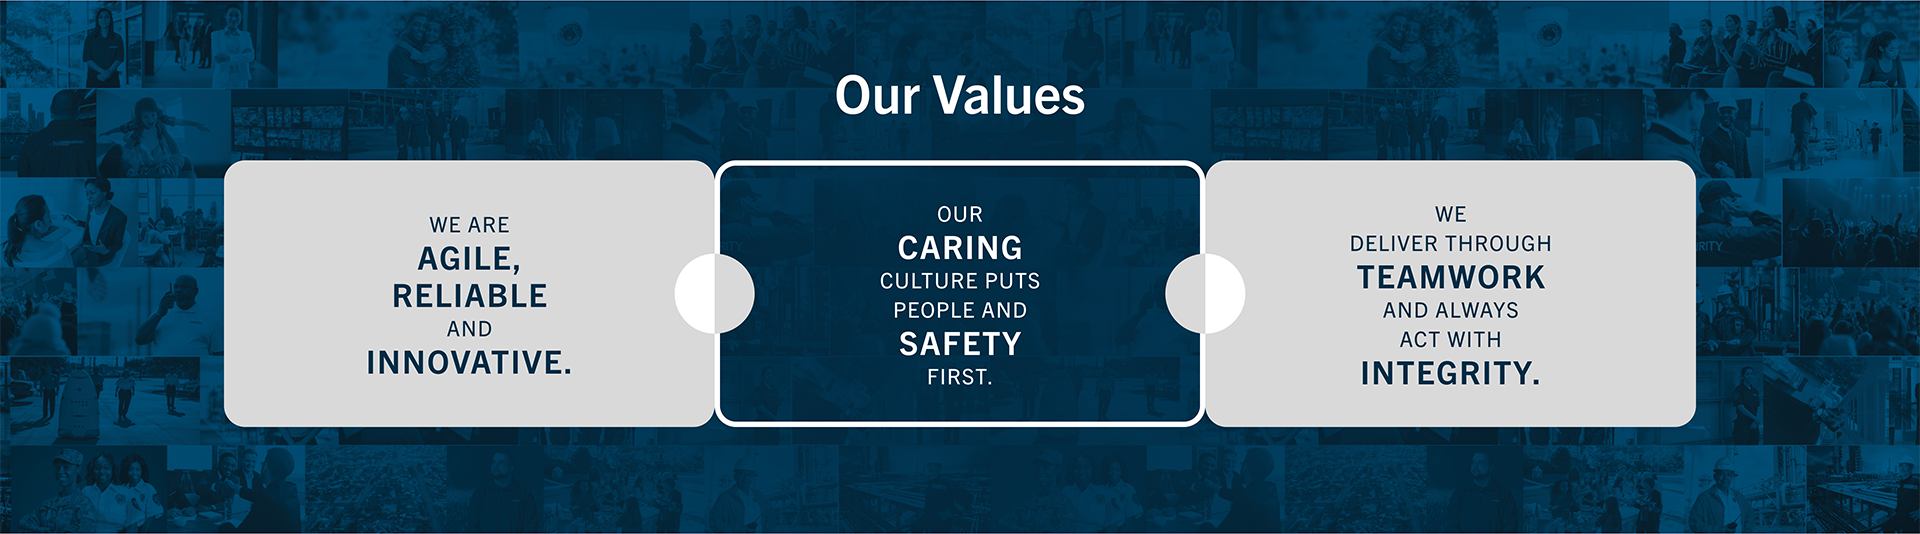 Our purpose and values